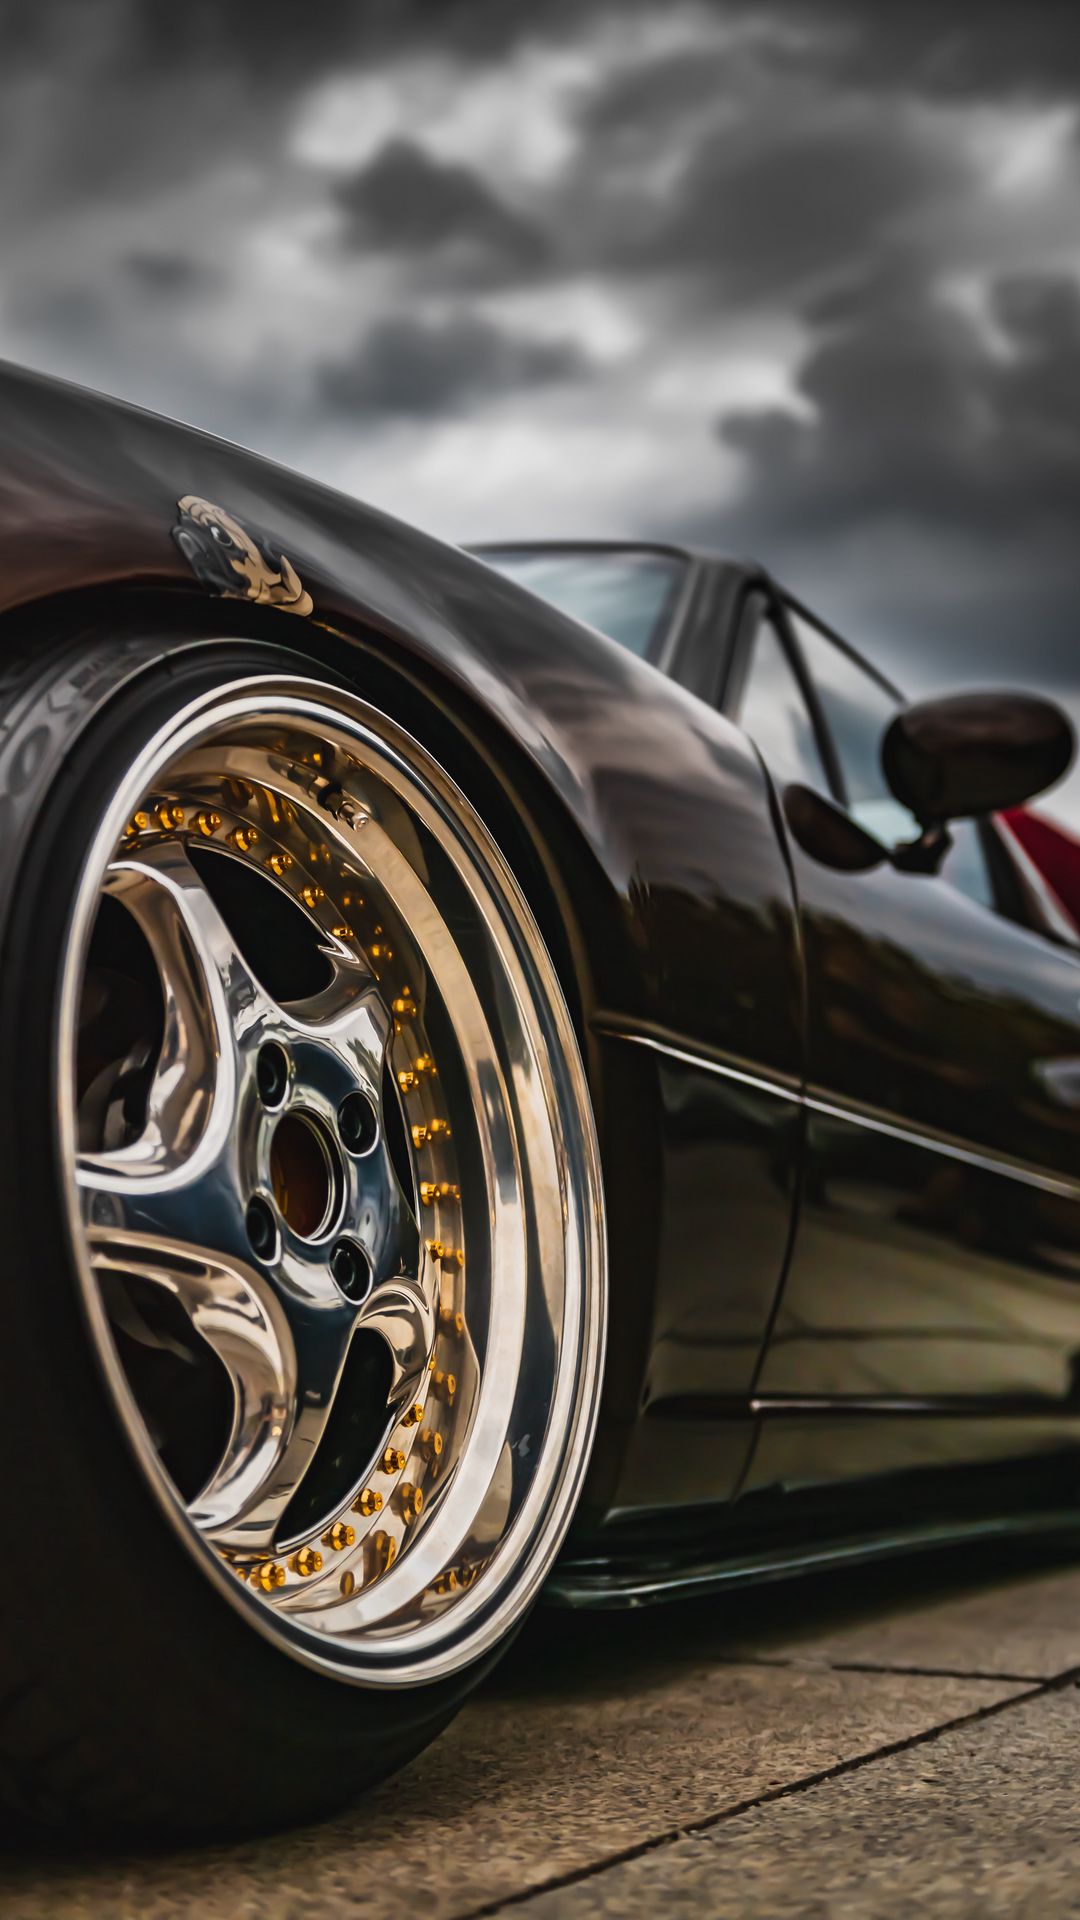 Best Modified Cars Photo & Wallpaper Download